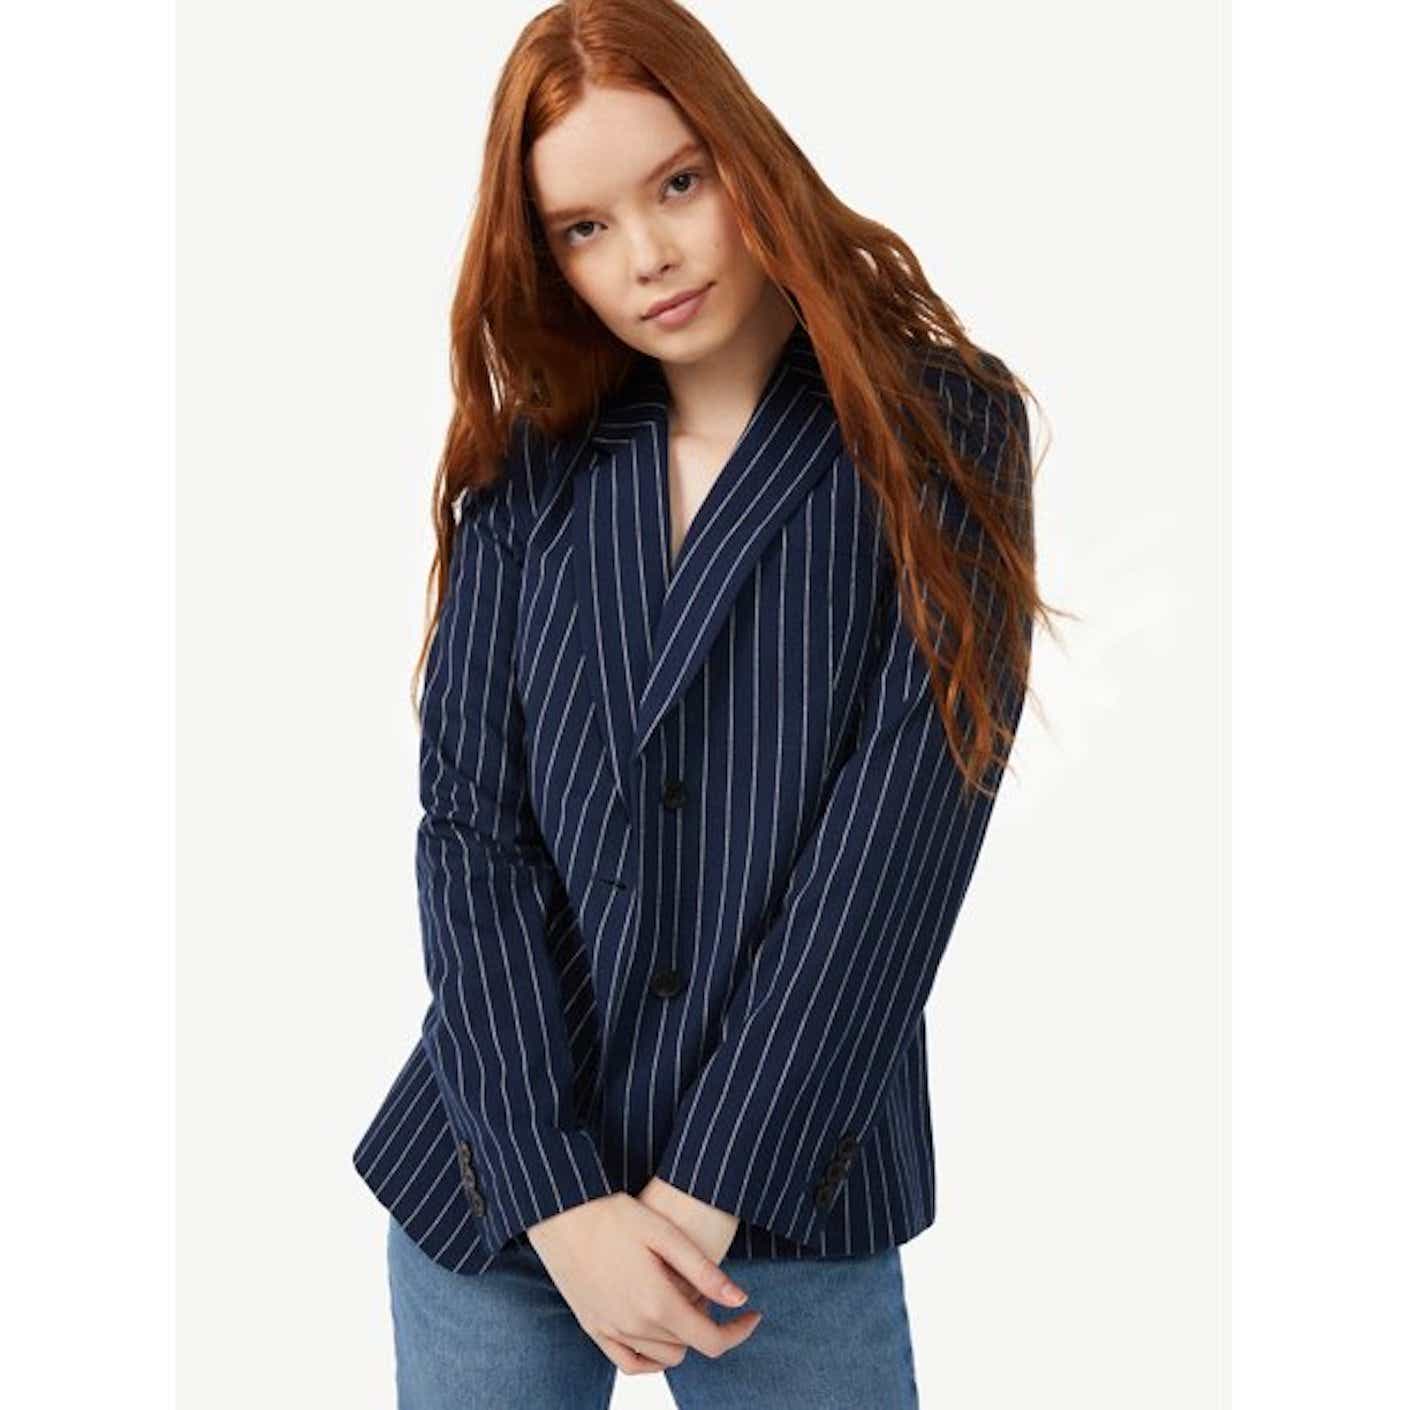 model wearing navy and white stripes blazer from walmart